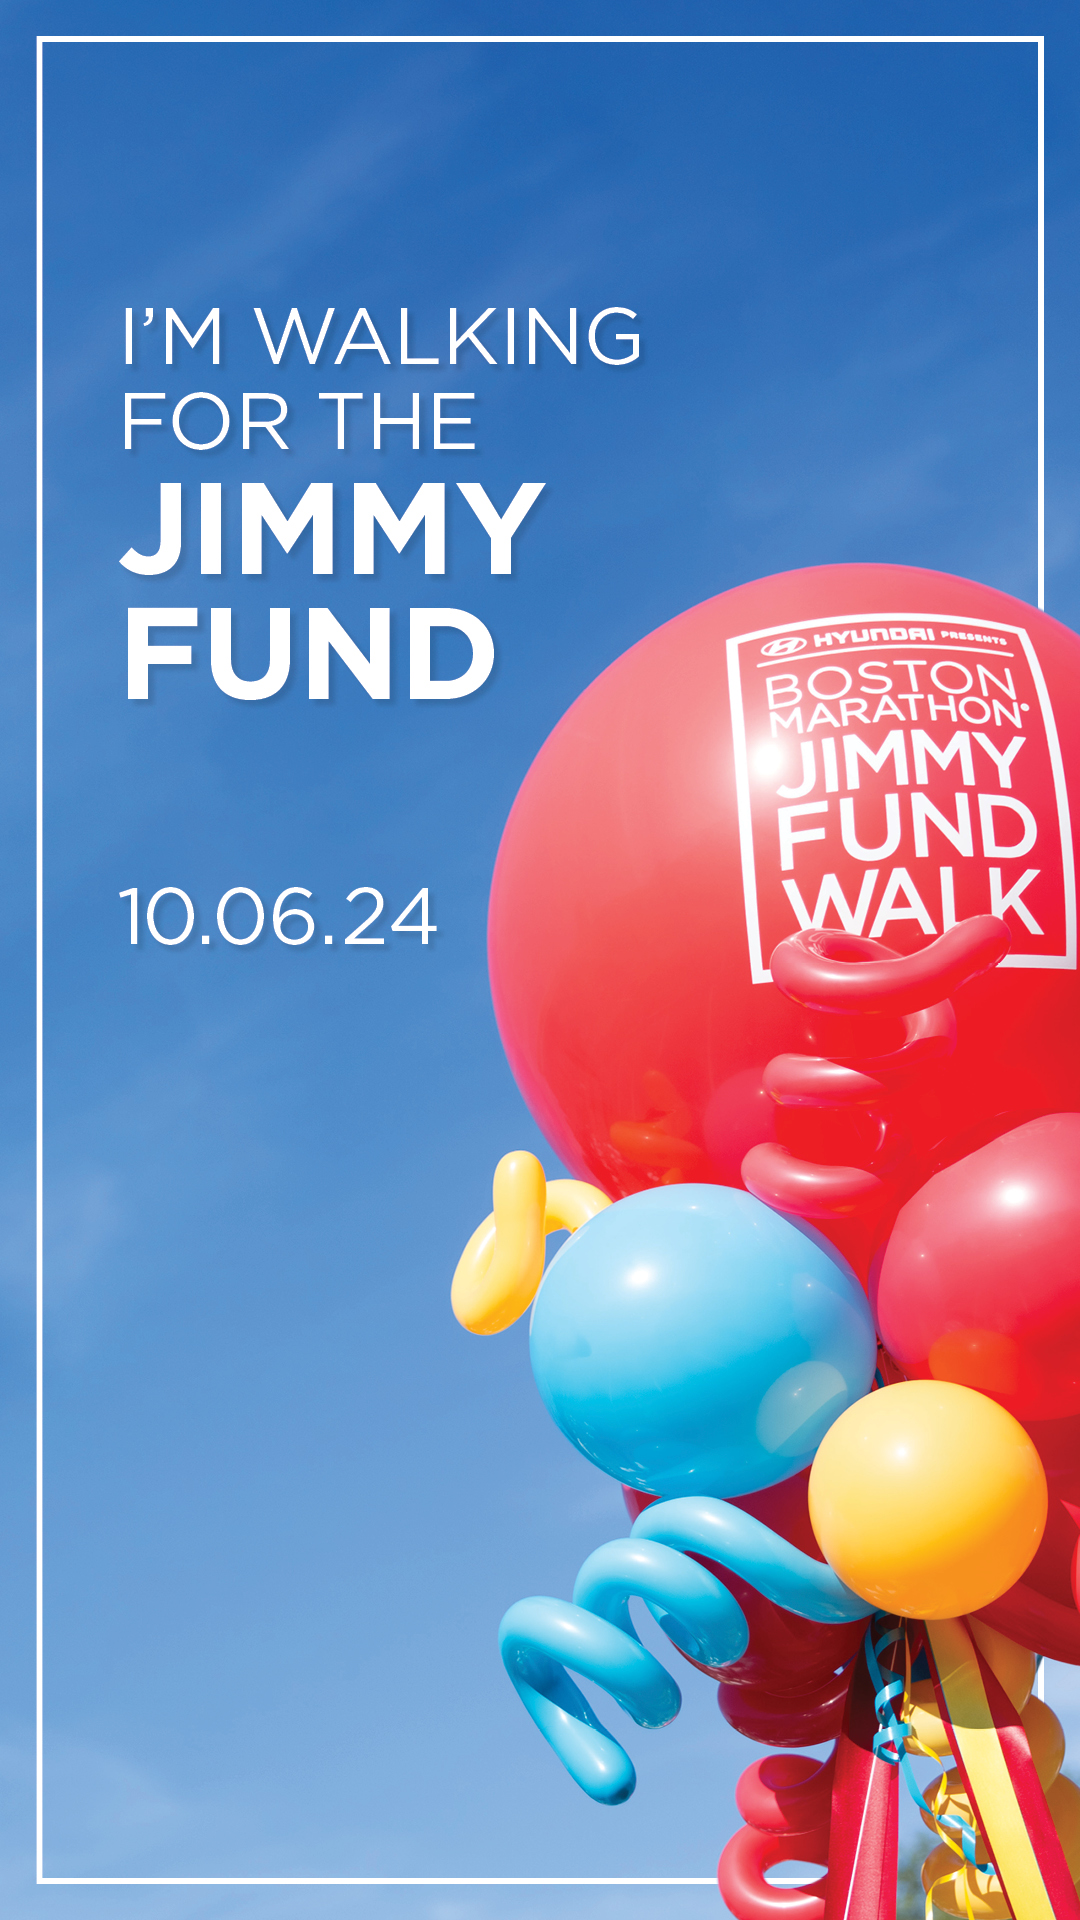 I'm walking for the Jimmy Fund